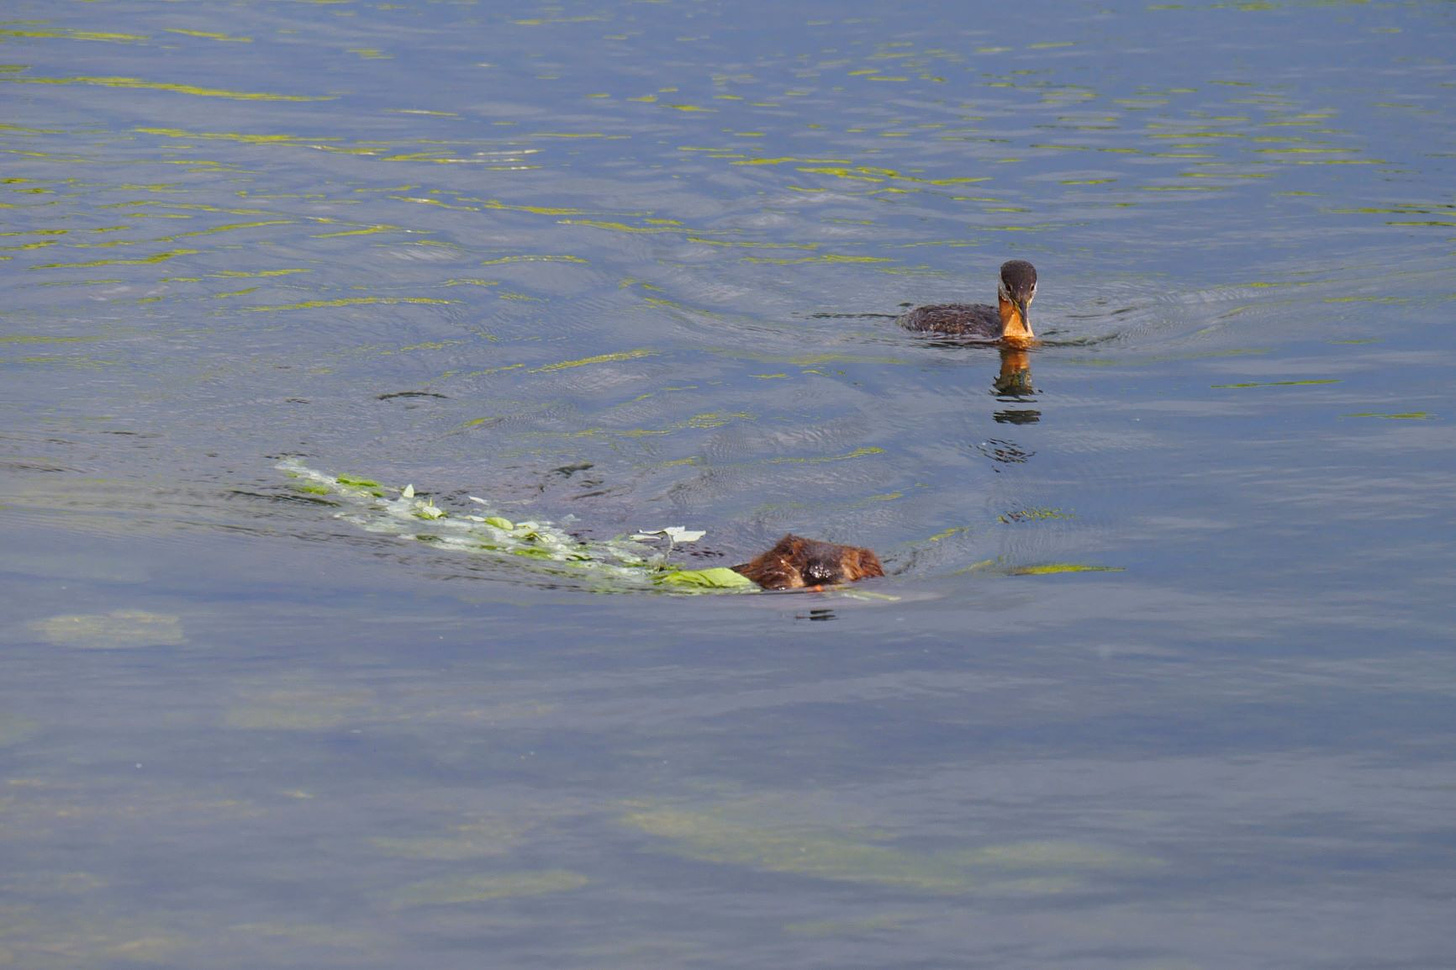 A beaver swims with branch it's mouth, followed by a red-necked grebe